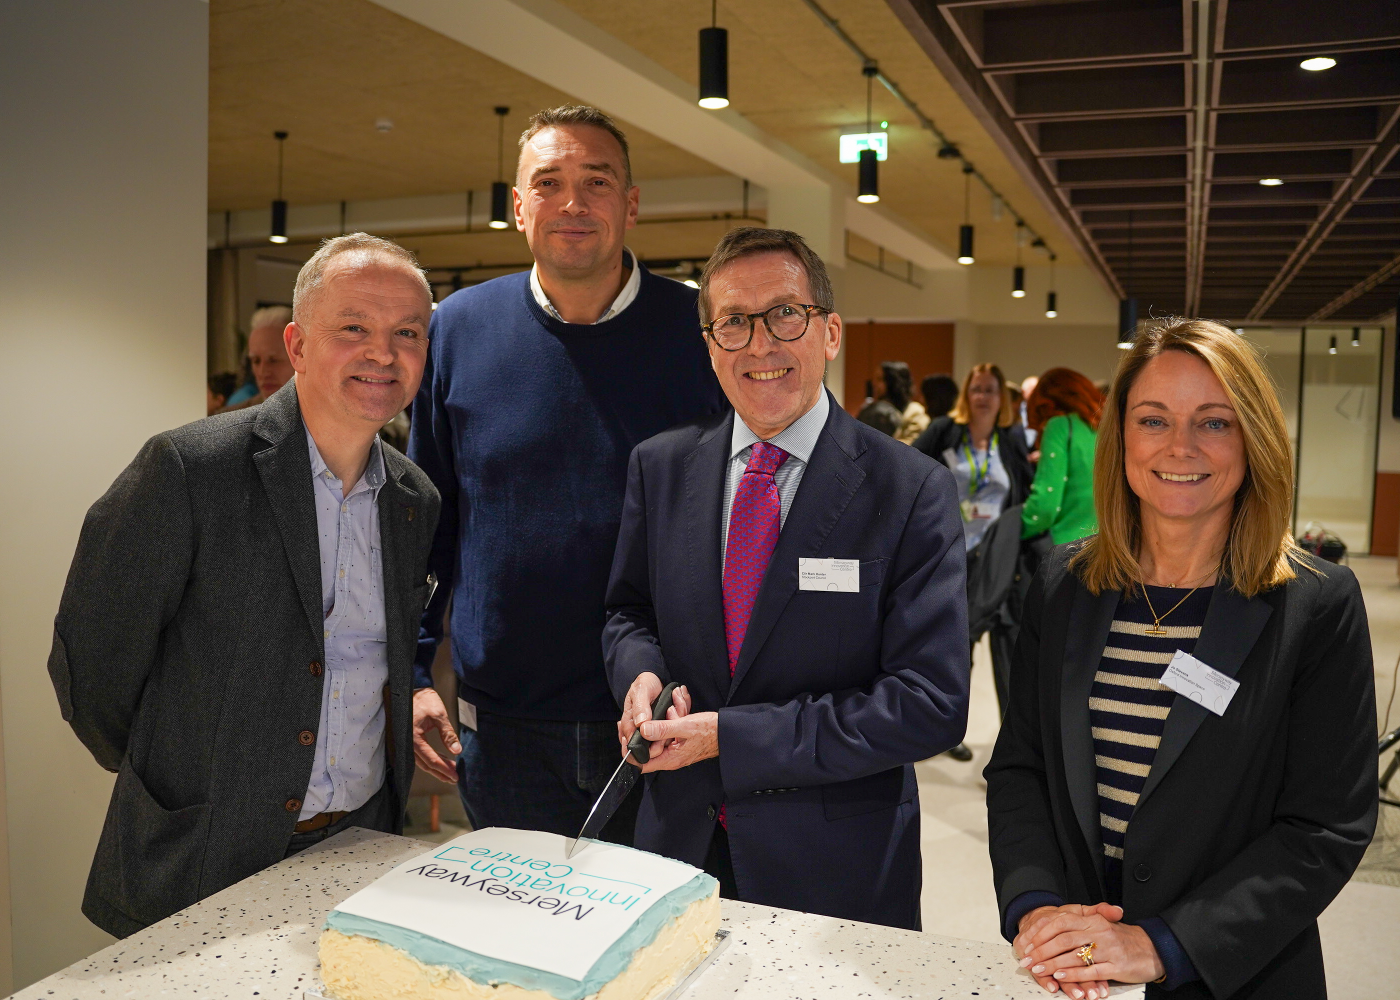 Stockport’s business community gather for official launch of Merseyway Innovation Centre